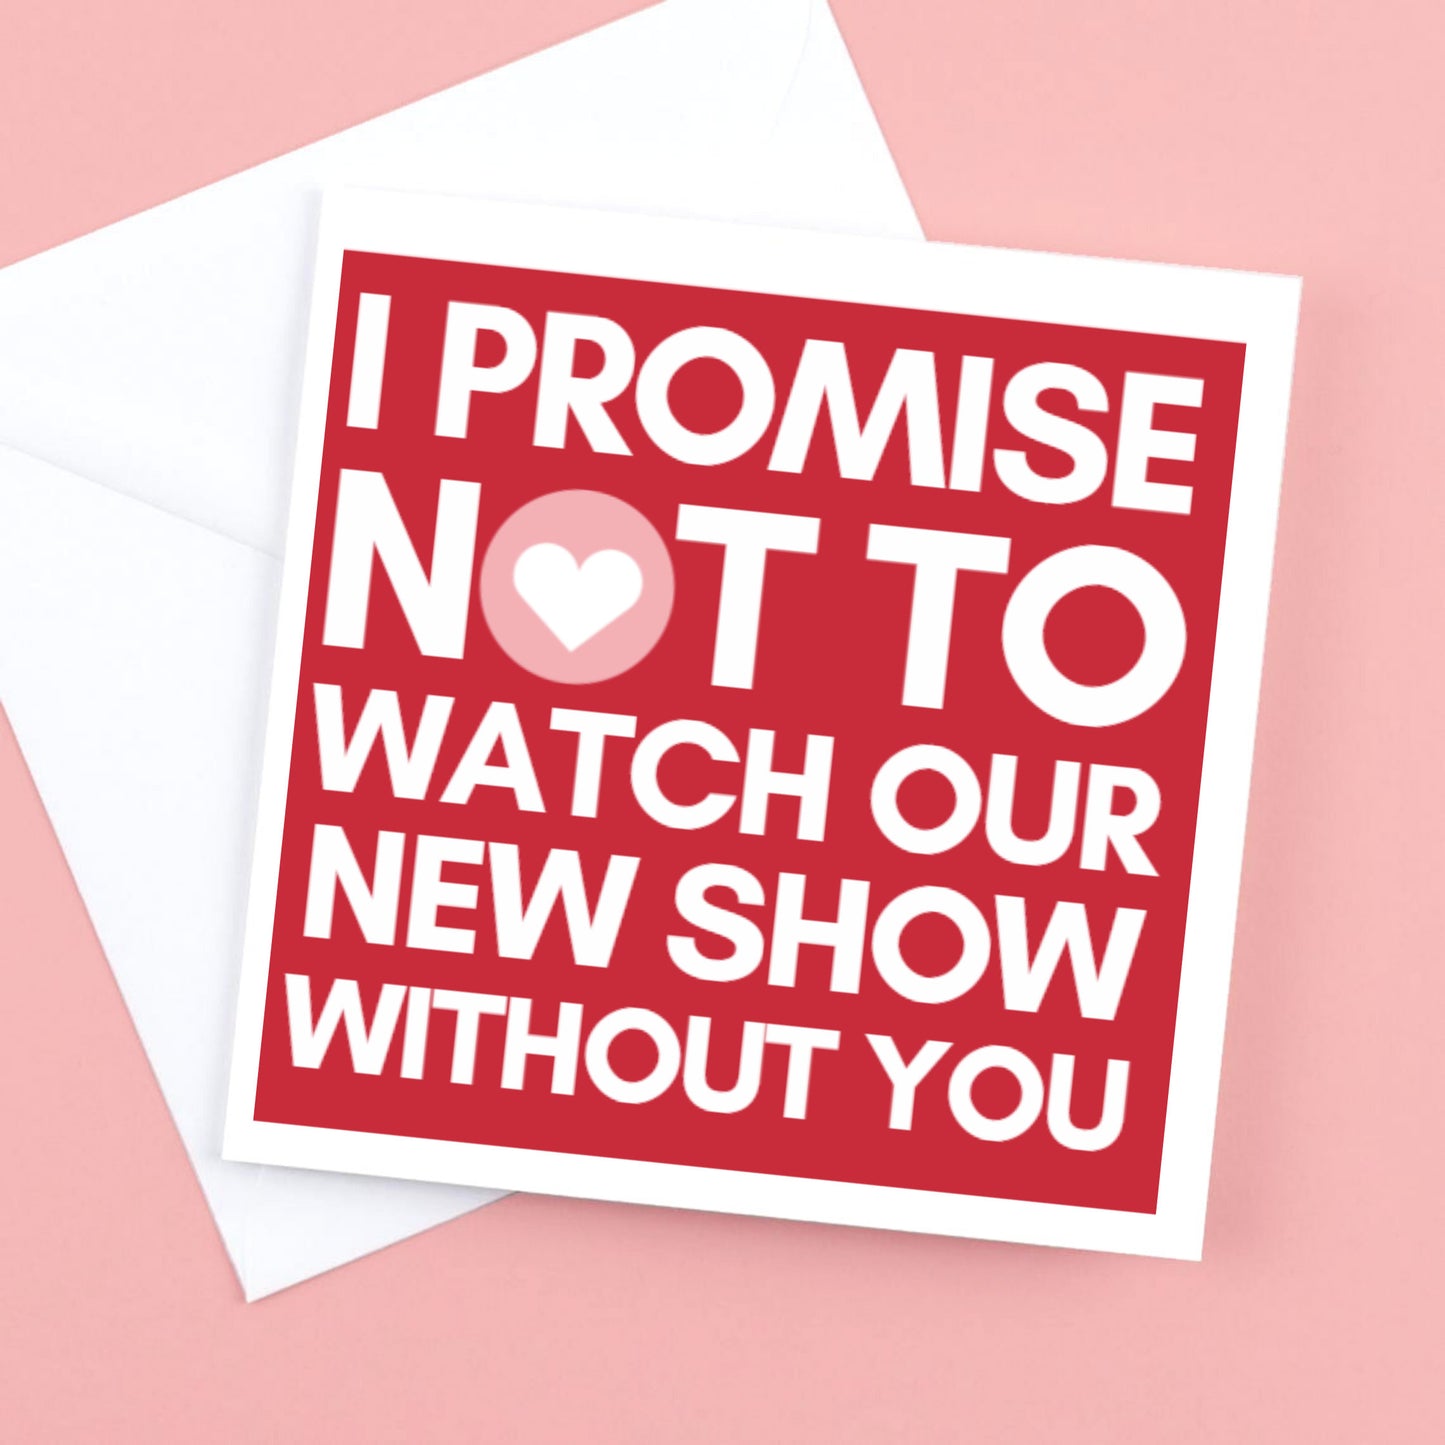 Valentines Card "I promise not to watch our new show without you"